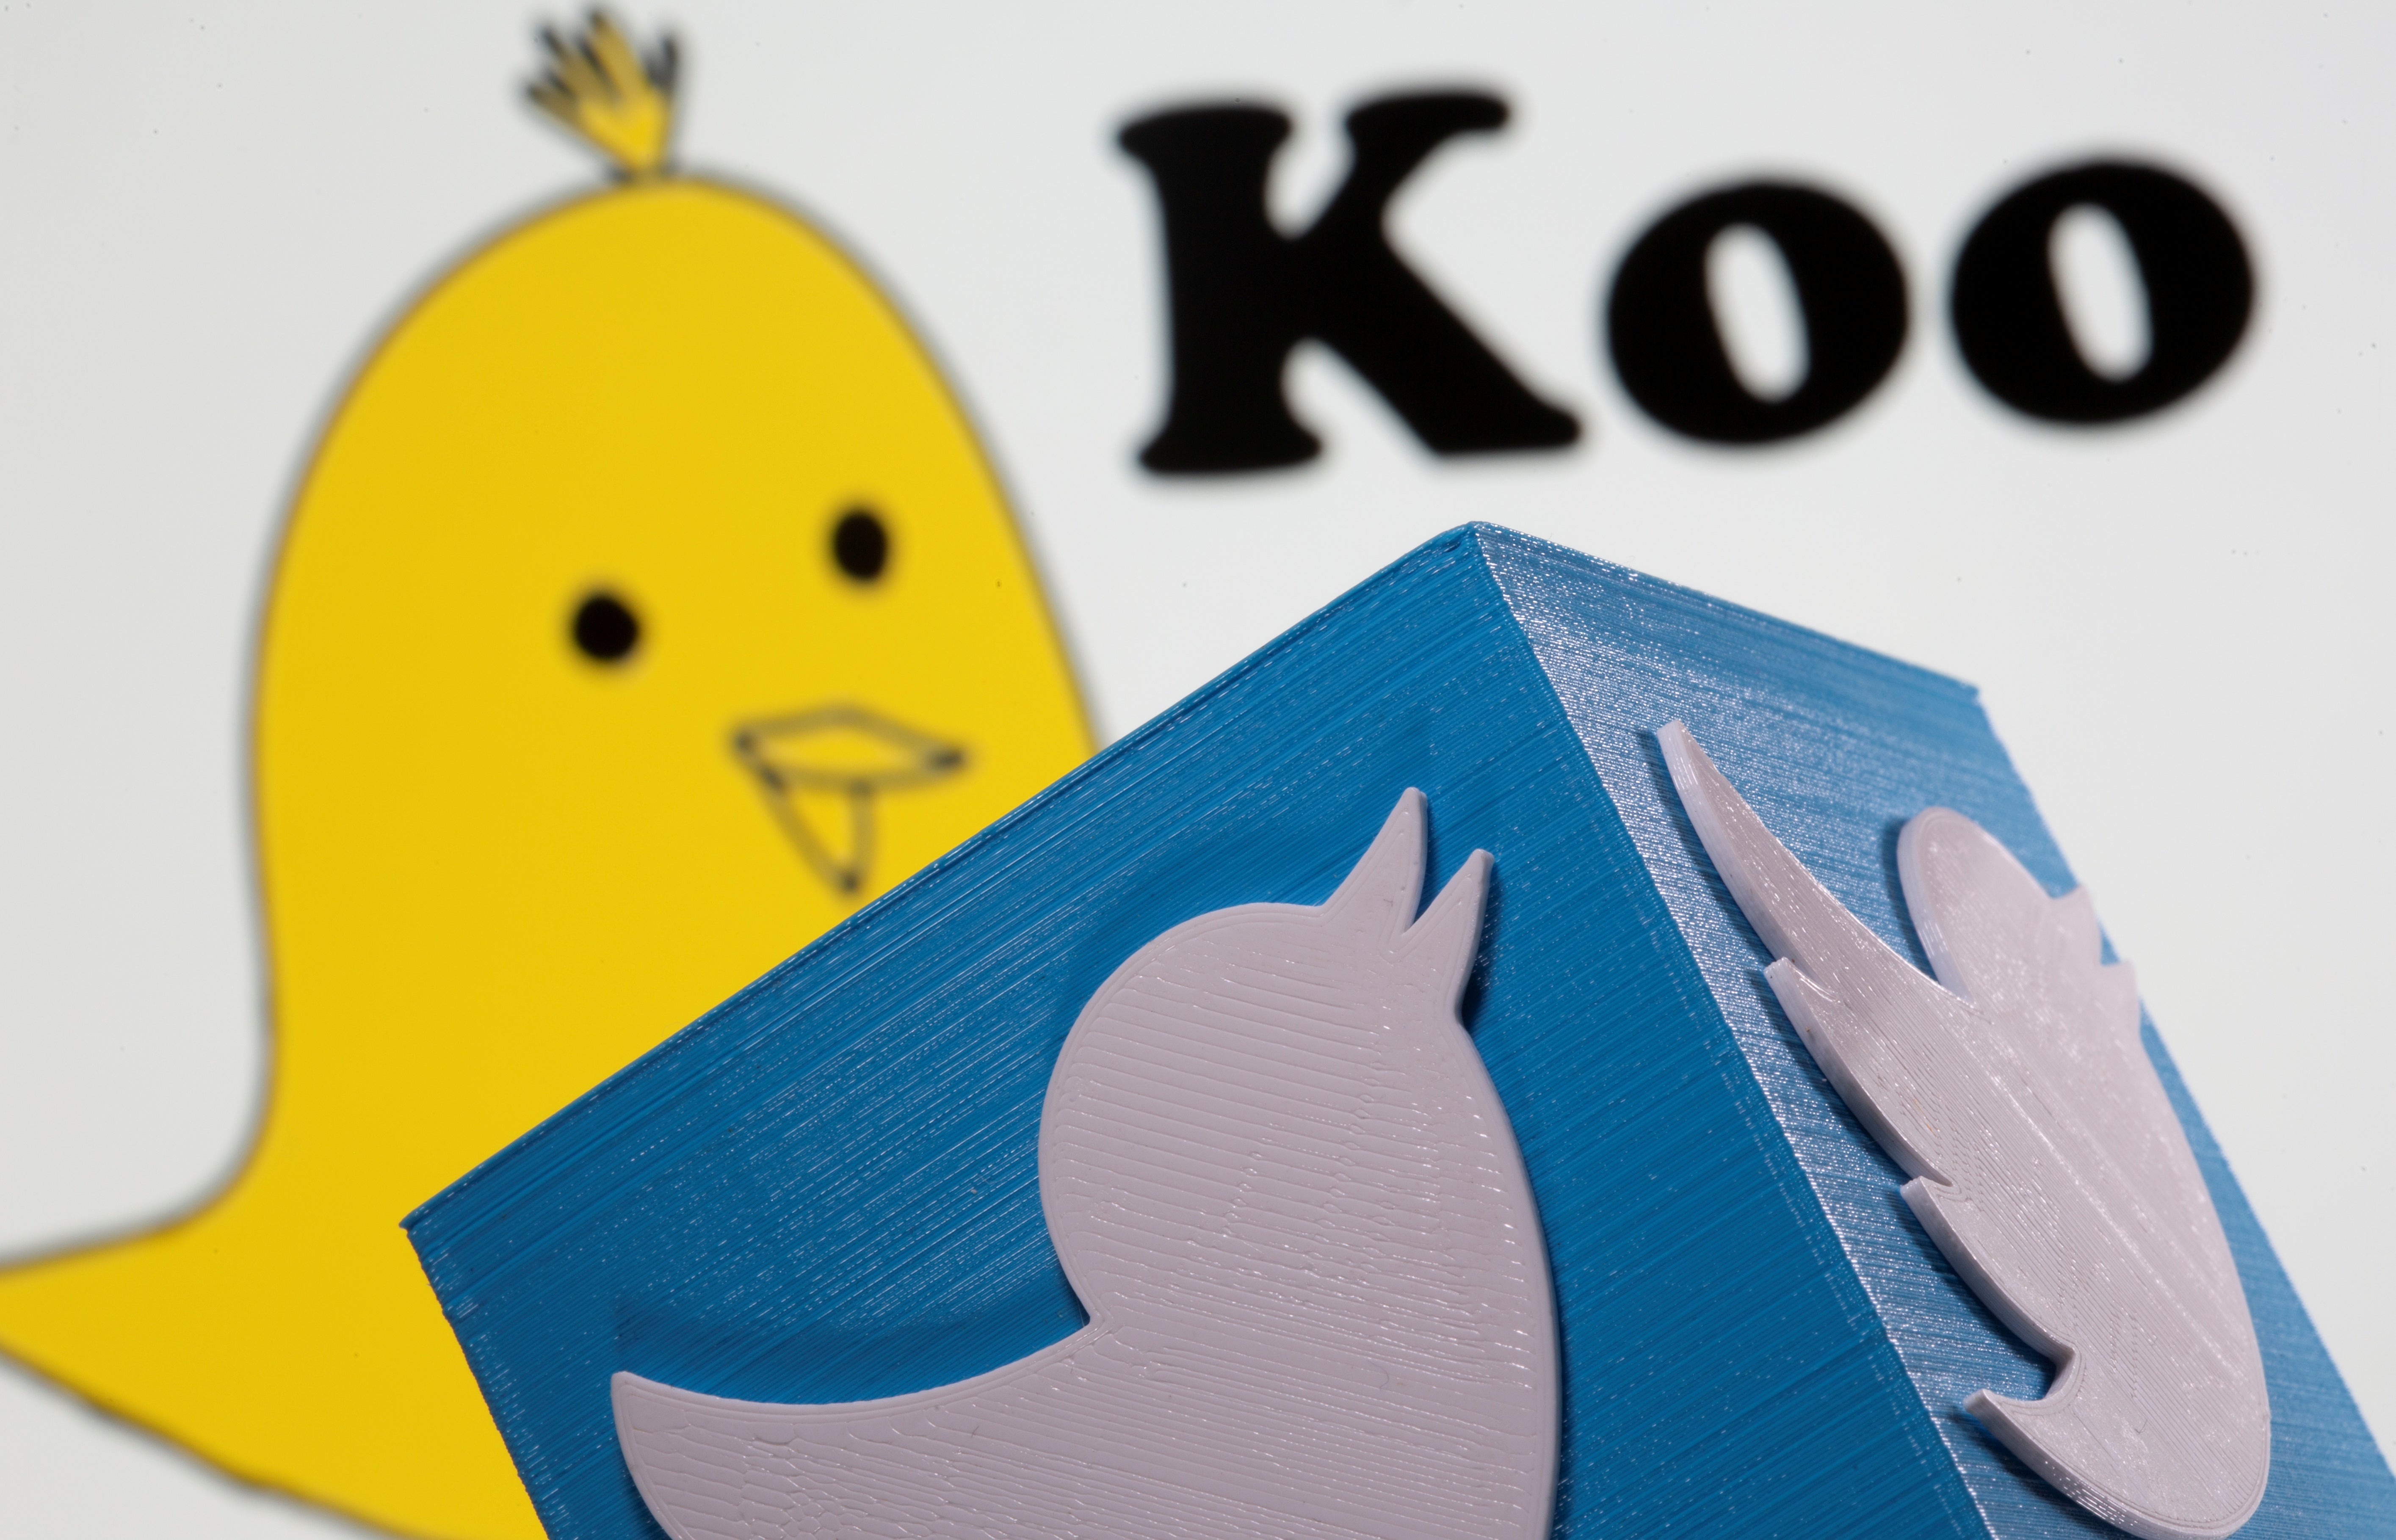 A 3d printed Twitter logo is seen in front of the Koo app's logo